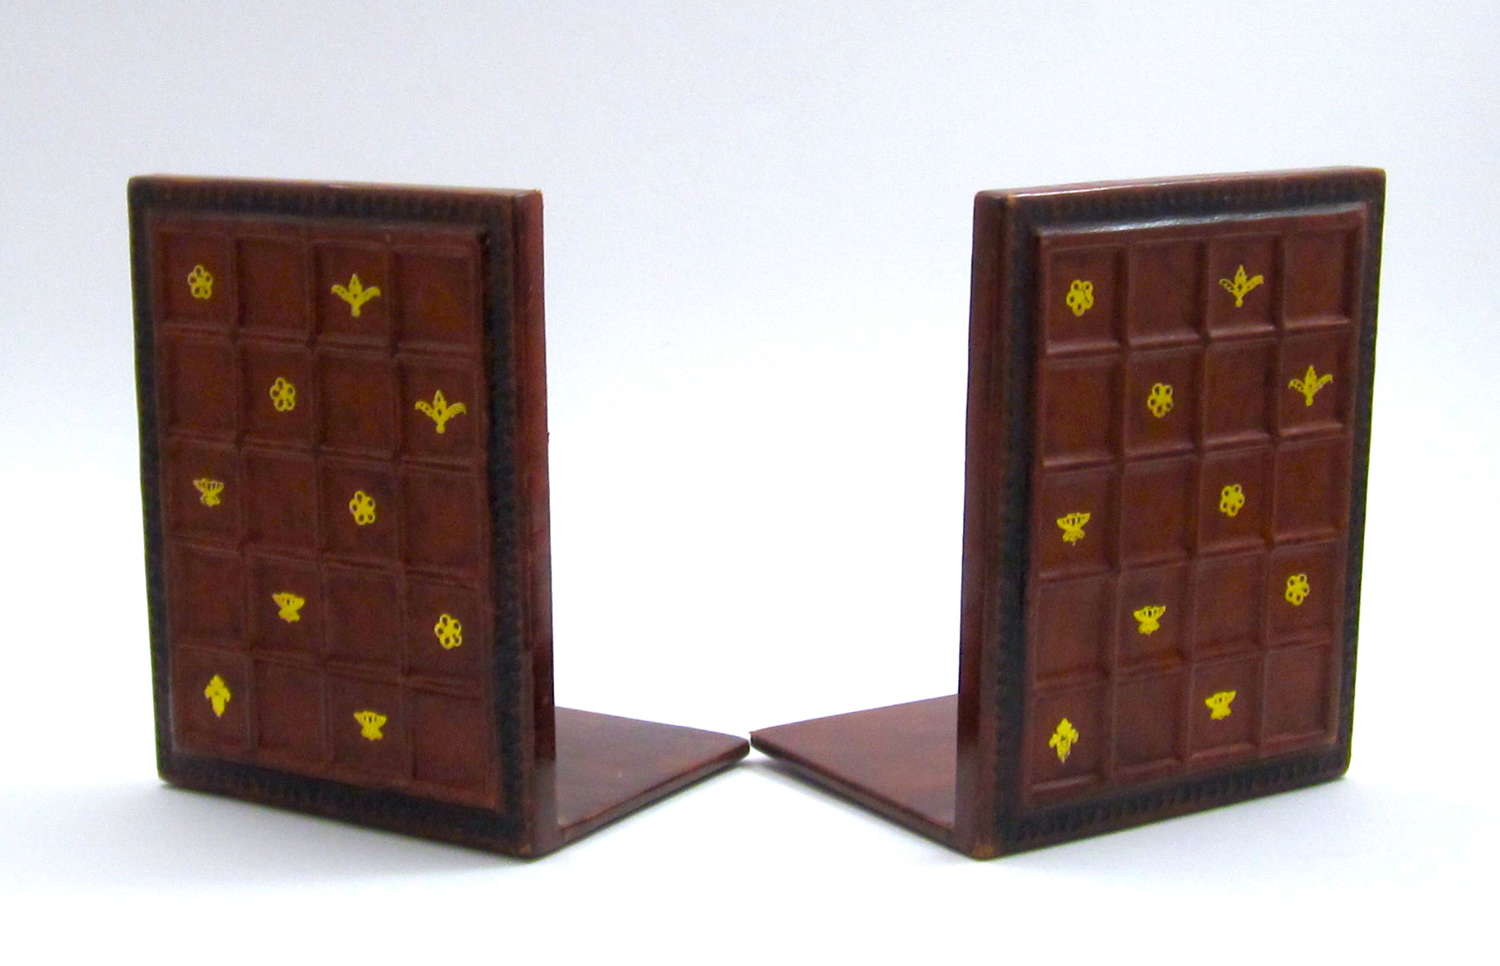 Pair of Vintage Leather Book Ends with Gold Stamped Design